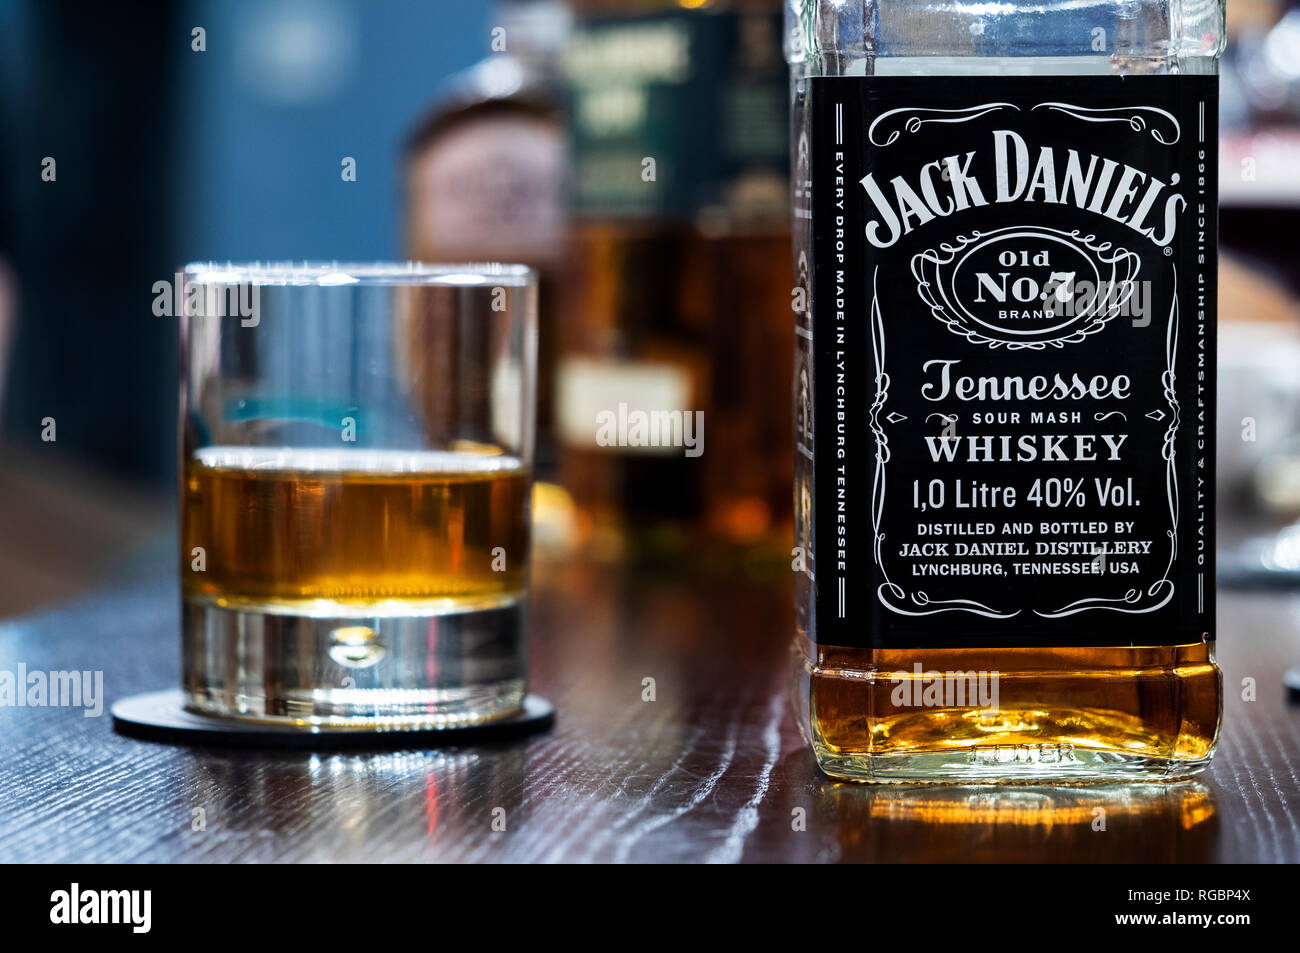 Jack Daniel's Tennessee whisky seen at the bar counter Stock Photo - Alamy